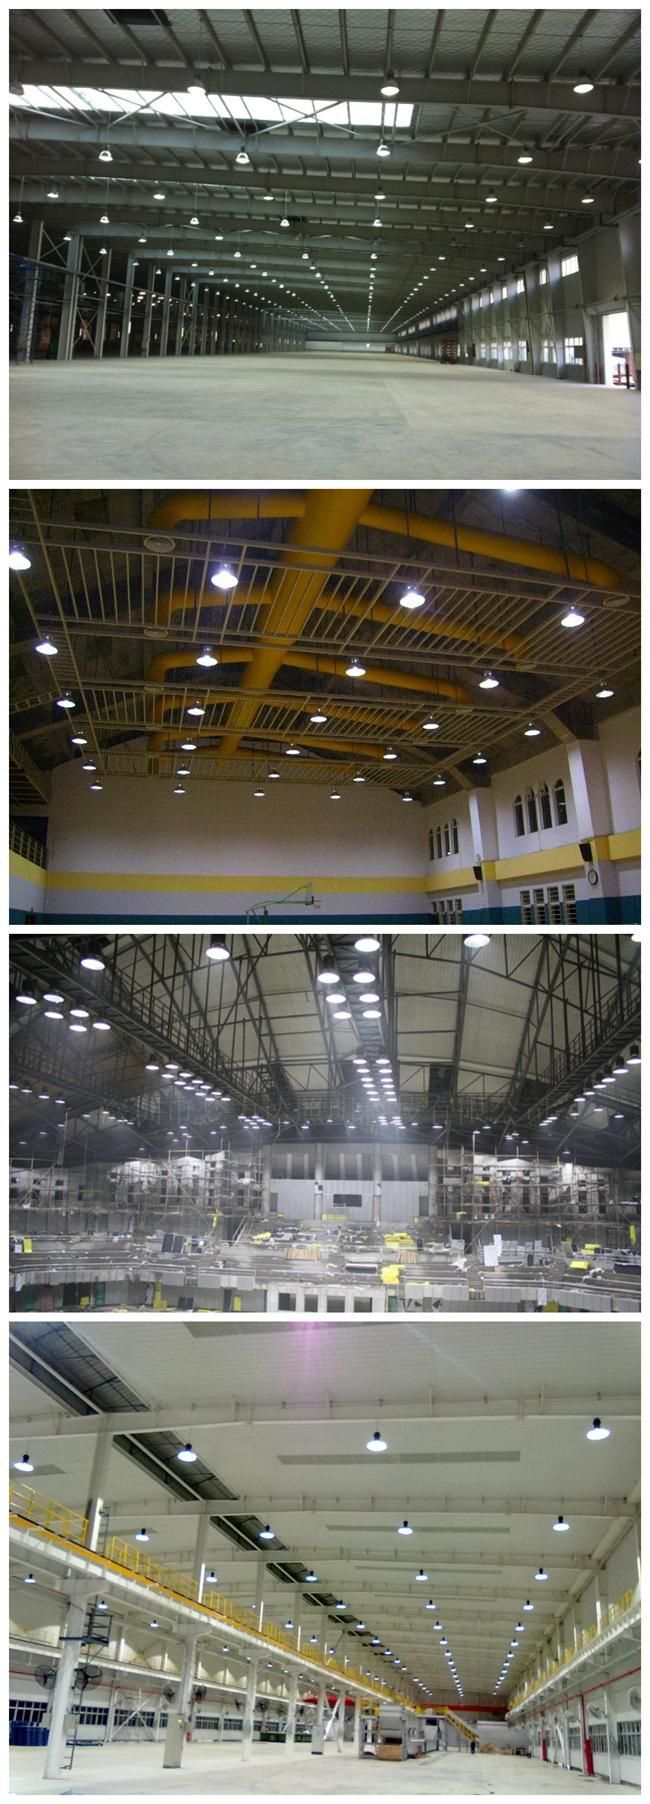 100W UFO LED High Bay Light for Factory Warehouse LED Industrial Lighting